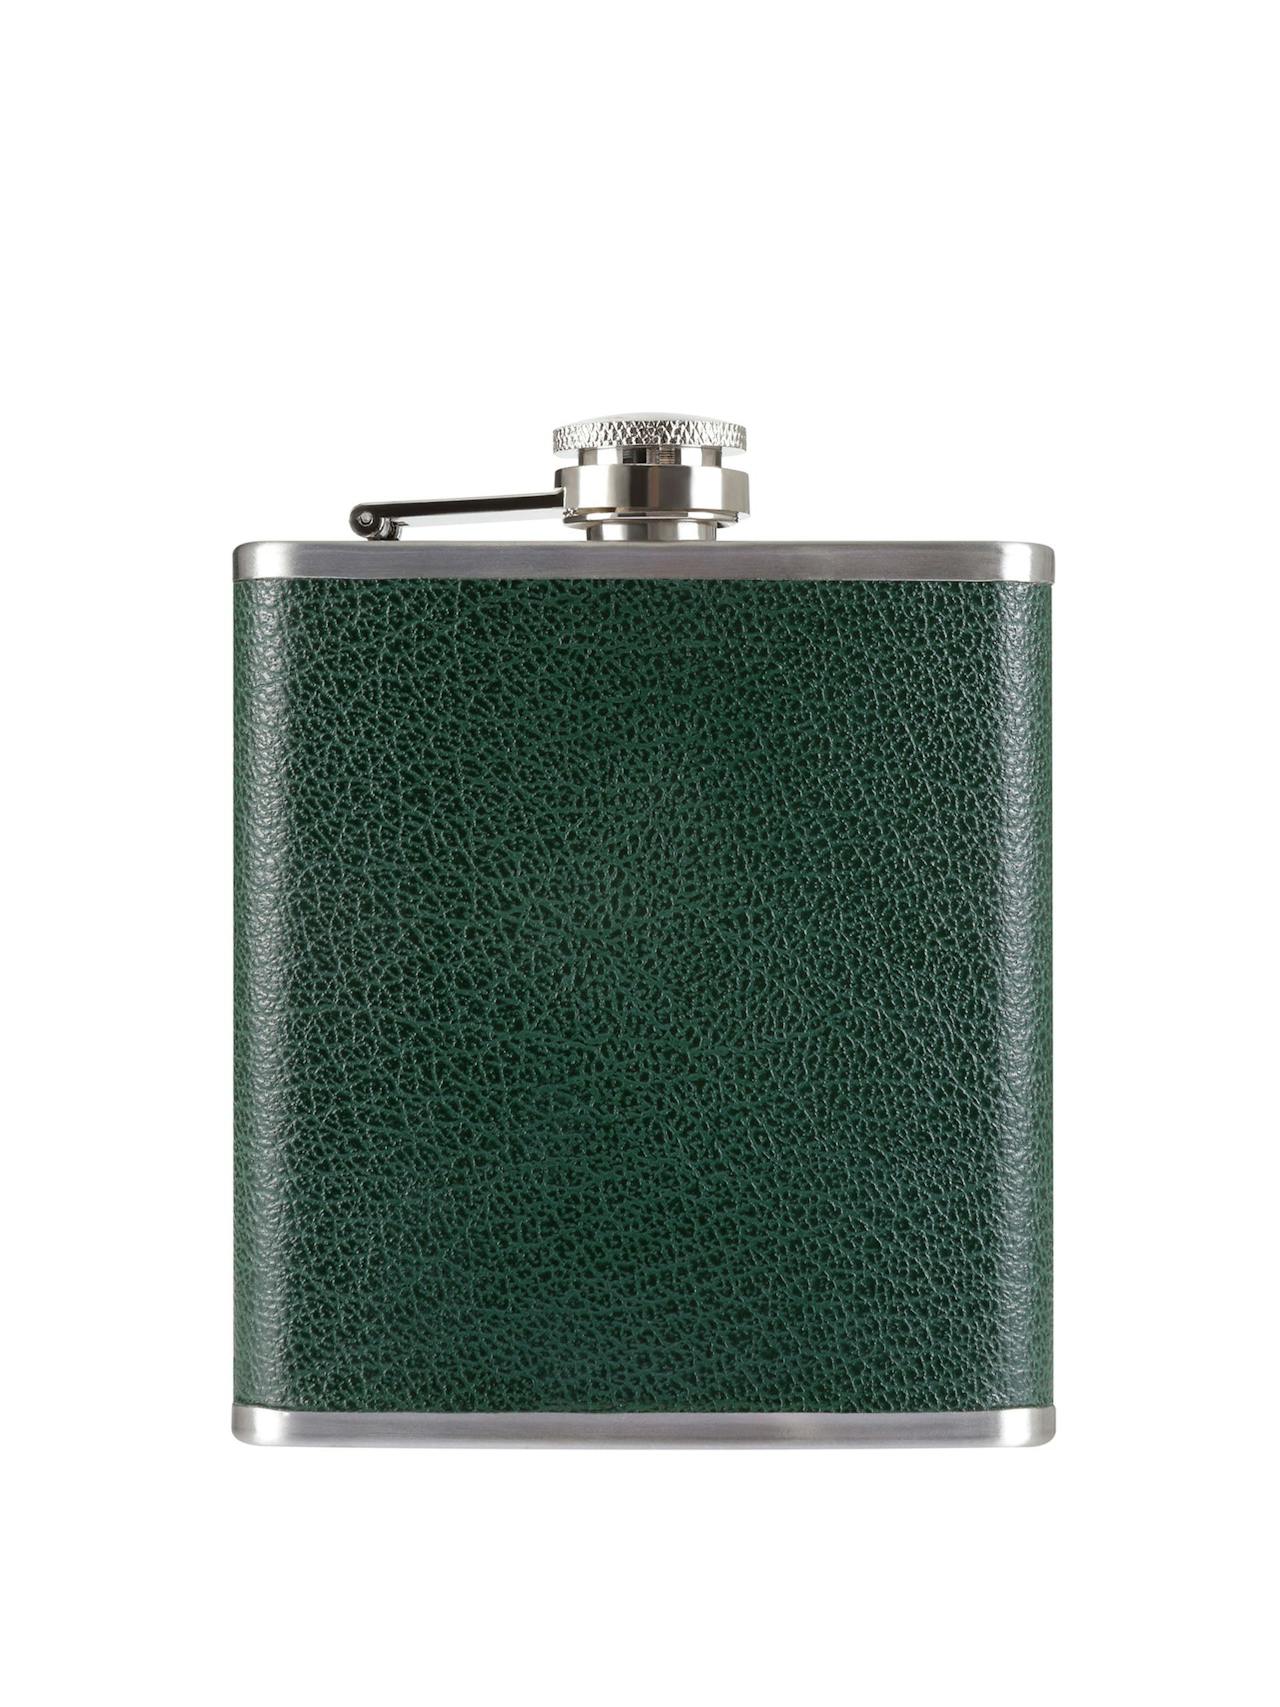 Racing leather green hip flask